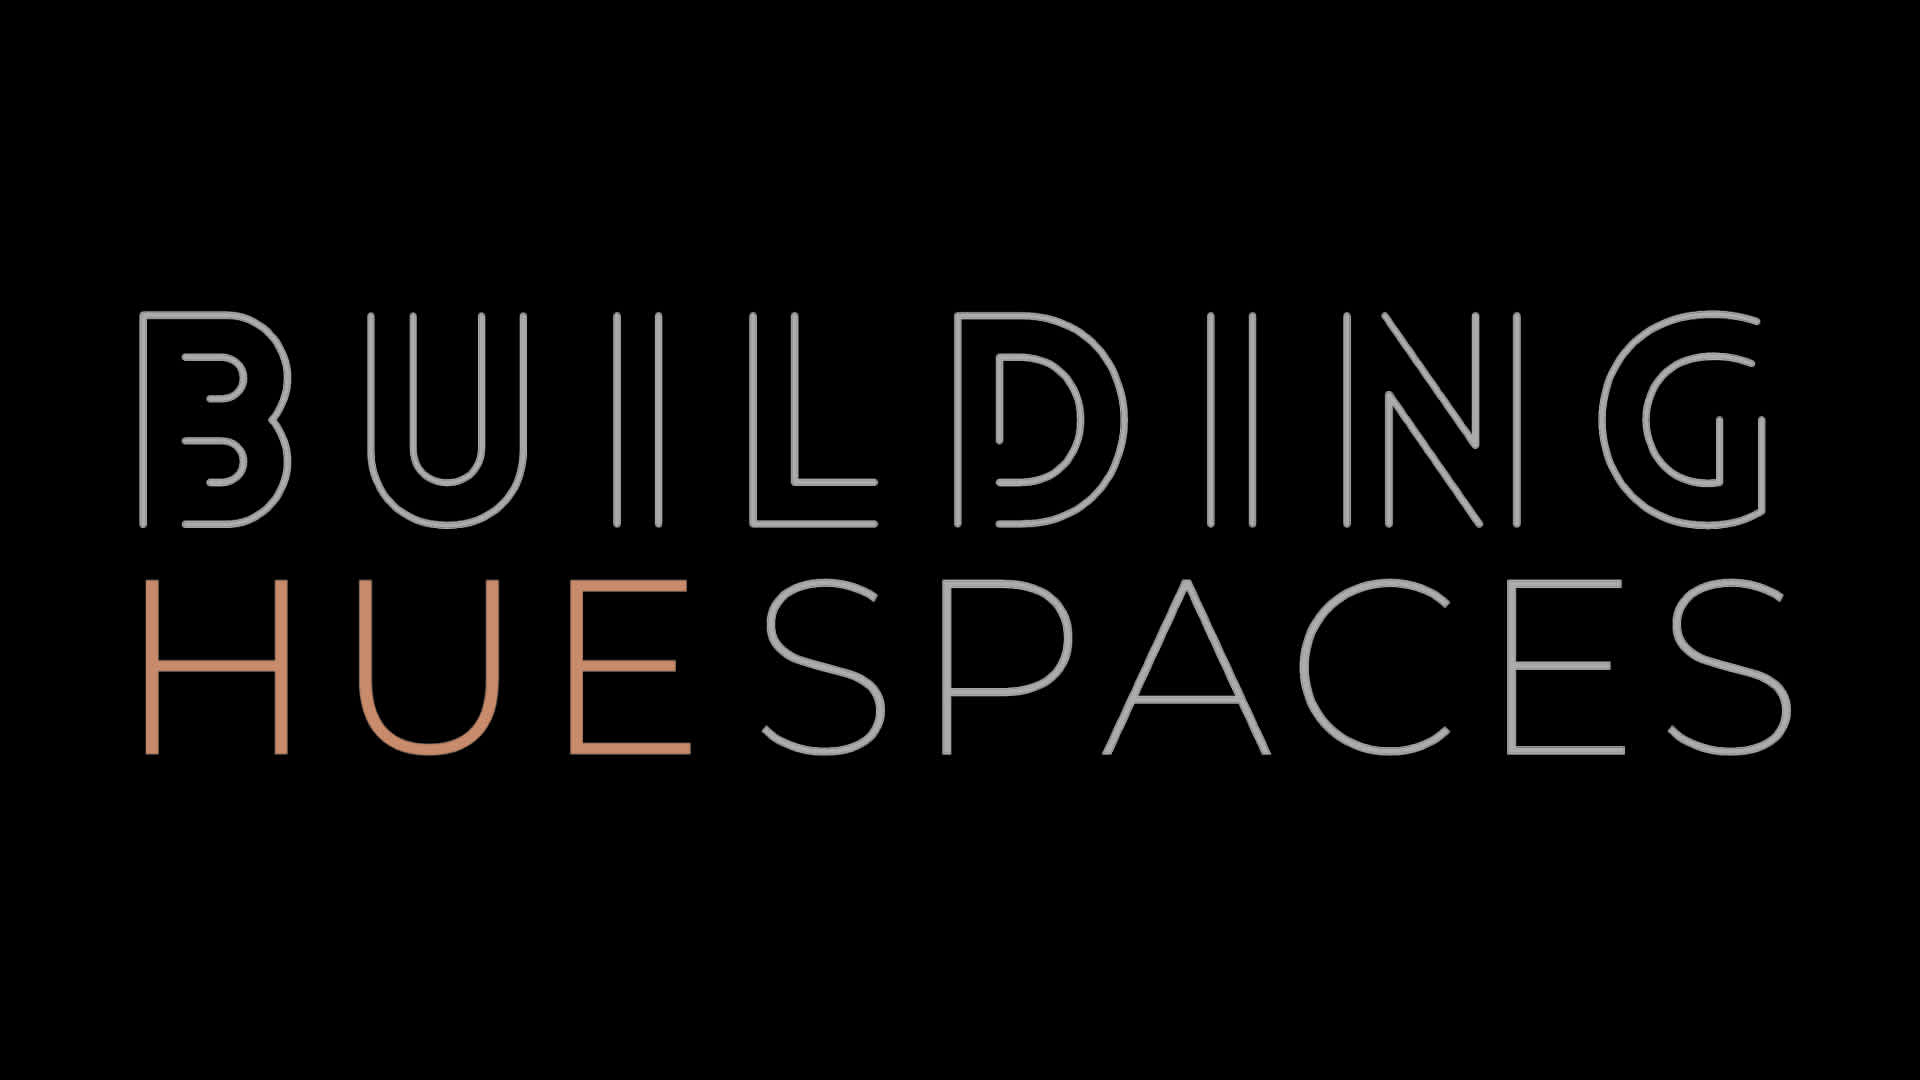 Building HueSpaces: The Legacy of Black Communities Built and Sustained, held at Weeksville Heritage Center on May 11, 2023, co-organized by Bureau V Architecture's Peter Zuspan.